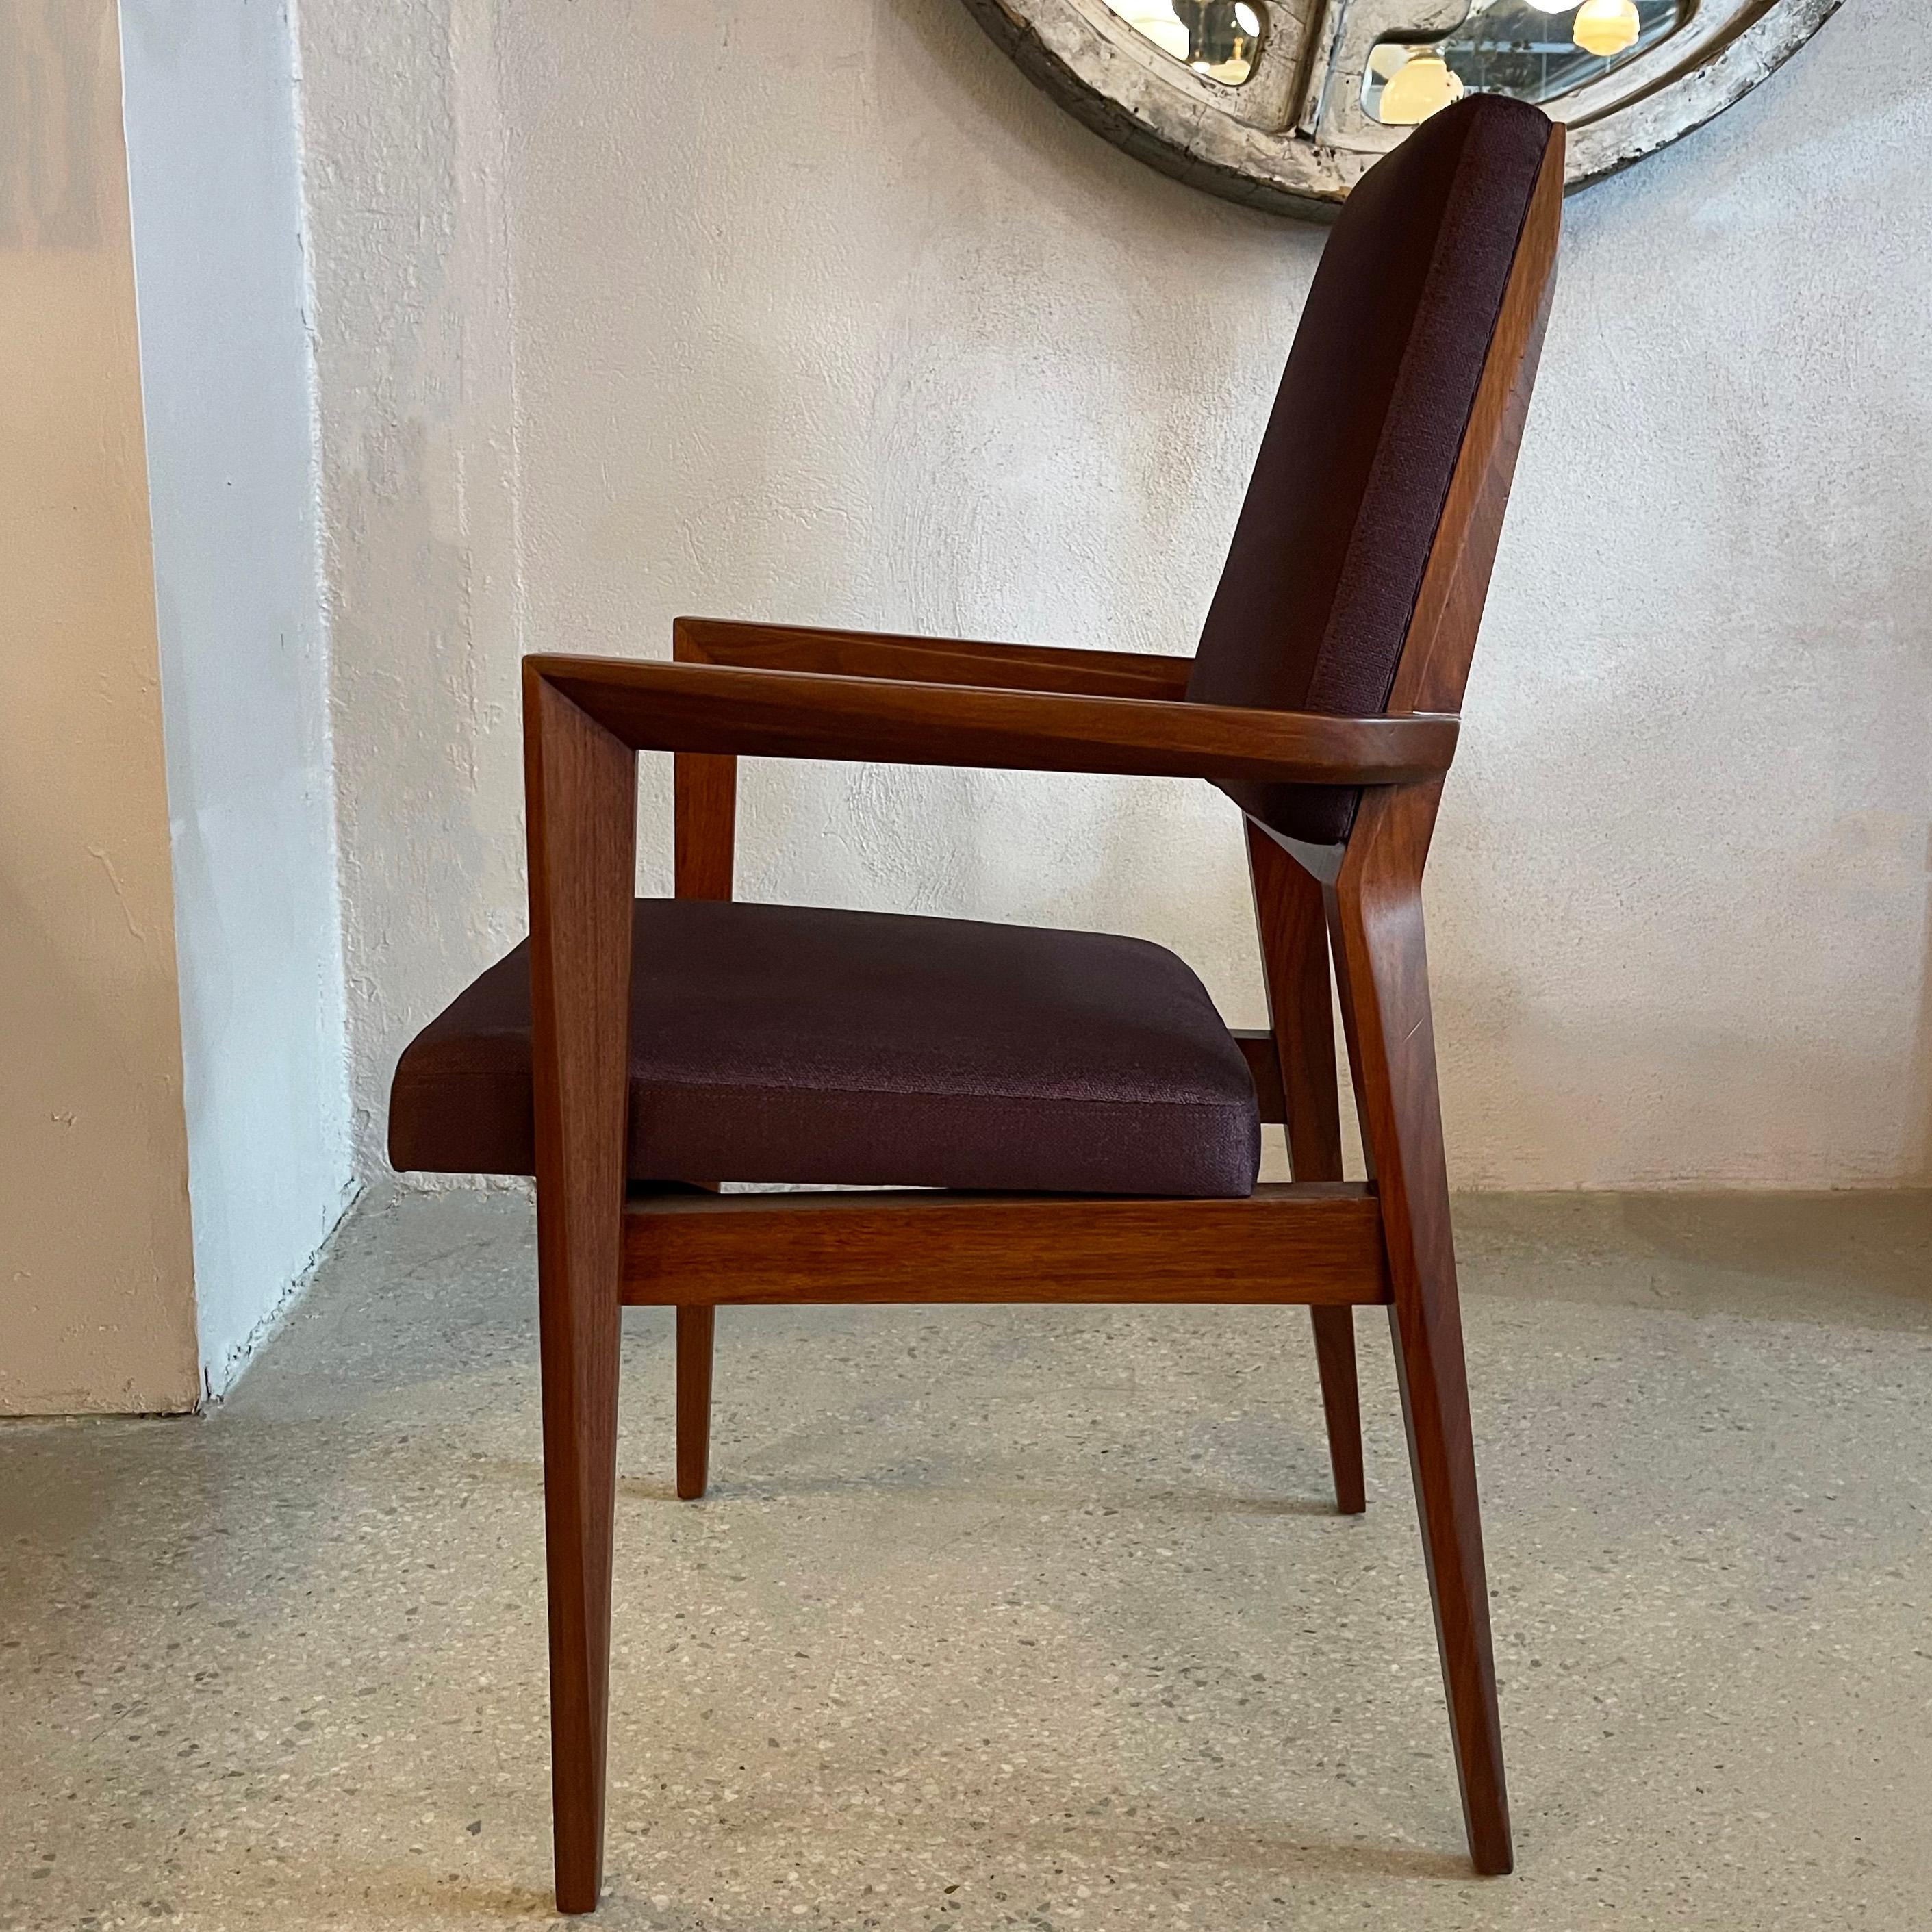 20th Century Mid-Century Modern Sculptural Walnut Armchair by Marc Berge For Grosfeld House For Sale